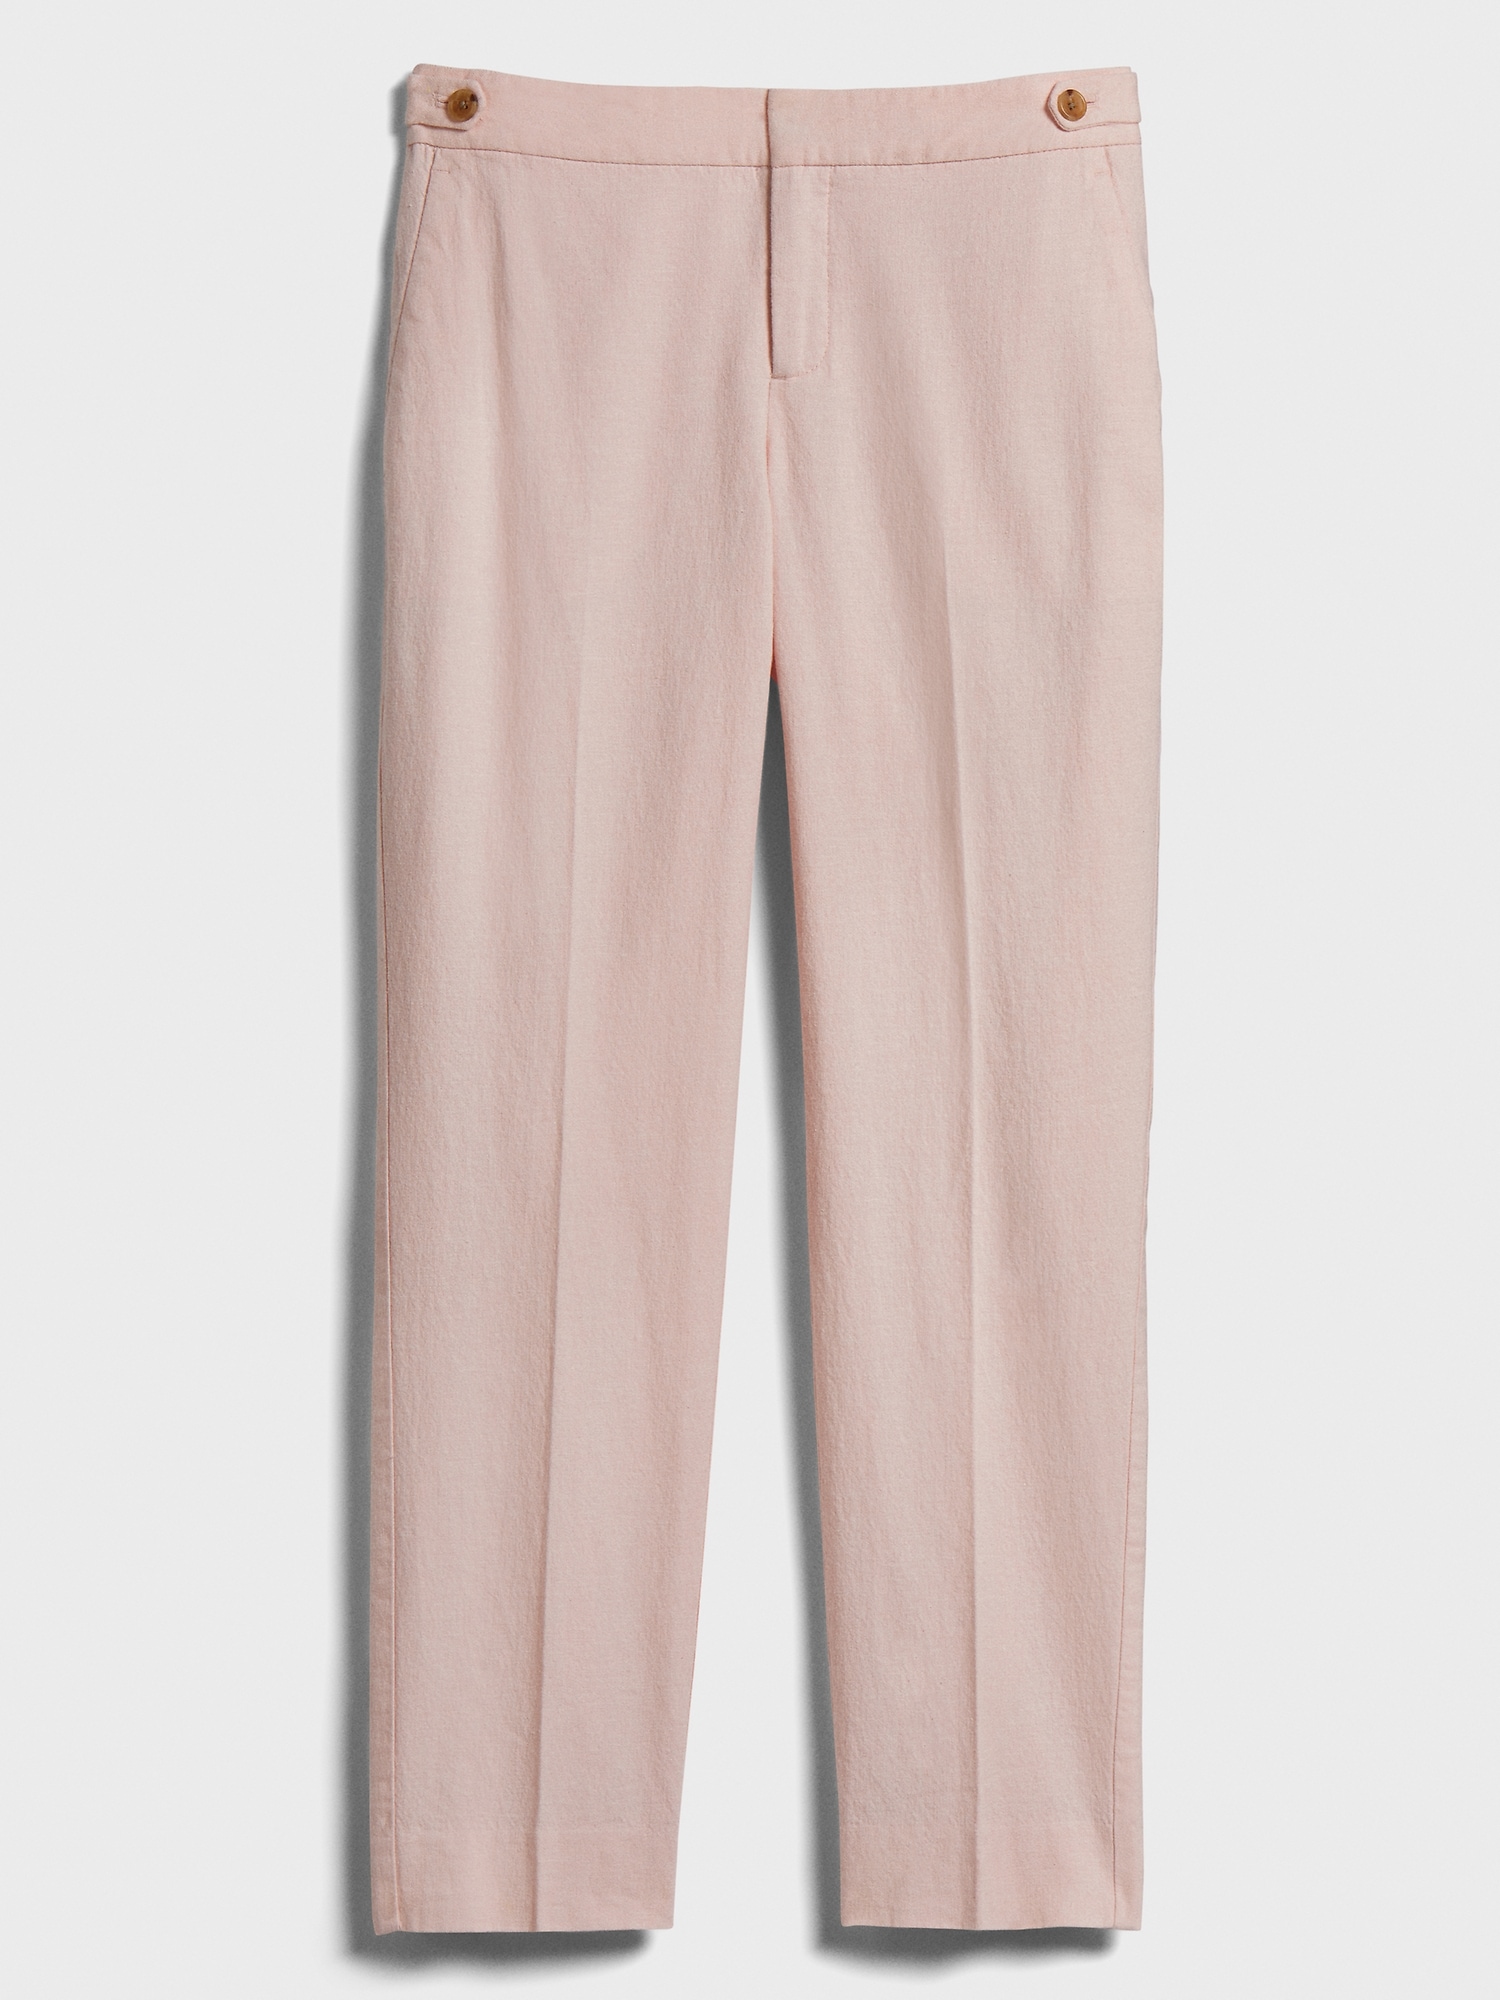 Petite Avery Linen Blend Tailored Ankle Pant